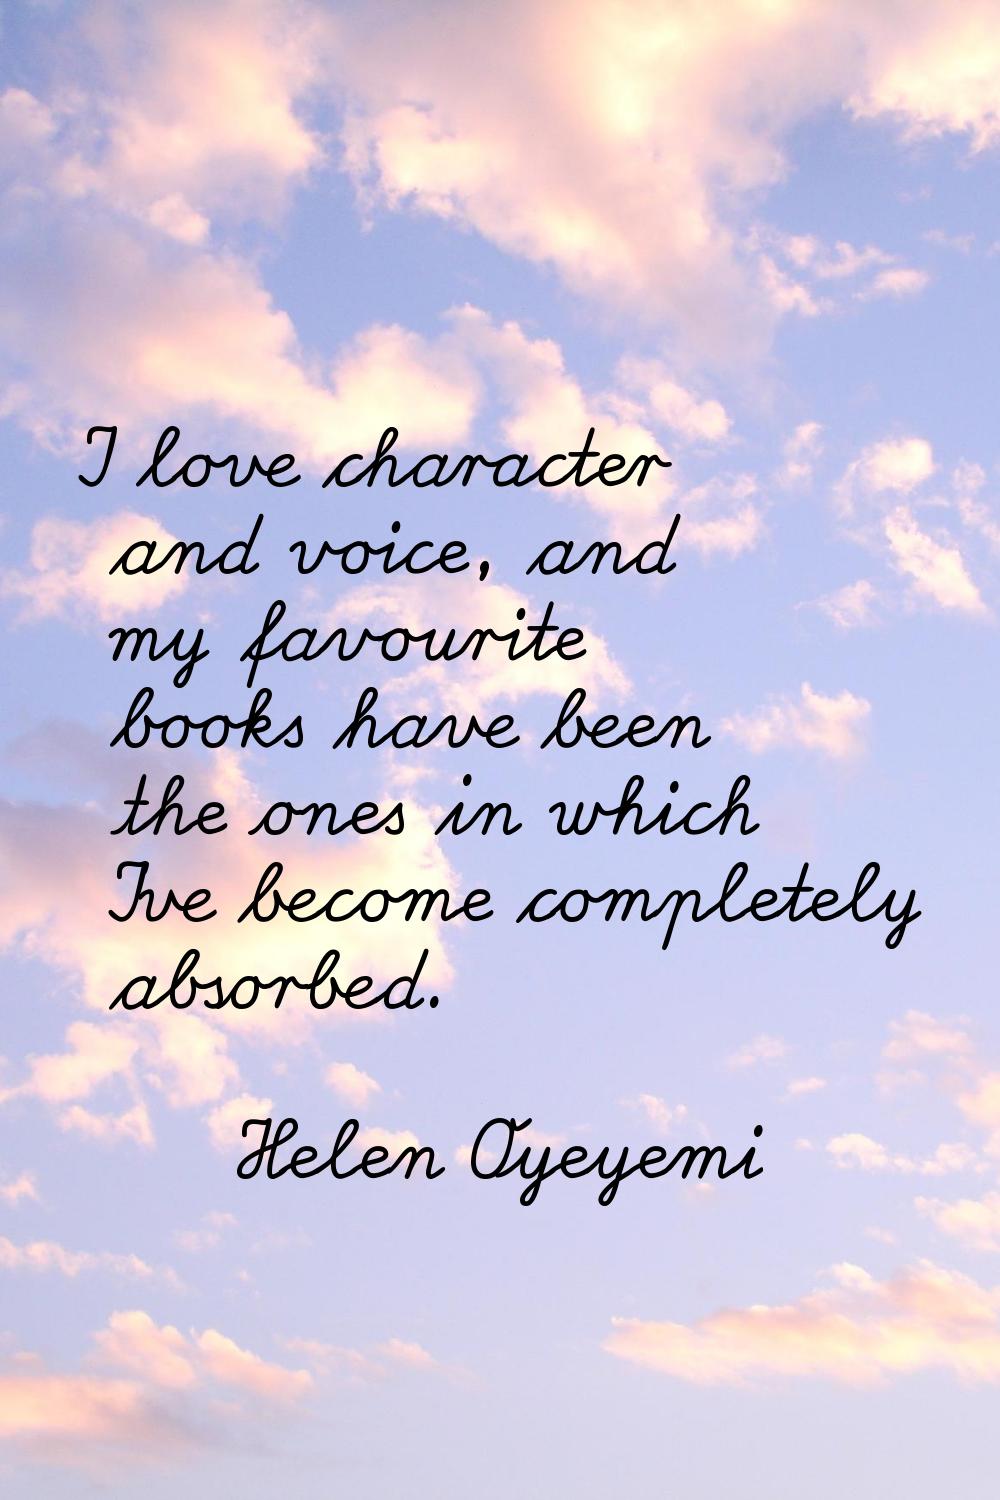 I love character and voice, and my favourite books have been the ones in which I've become complete